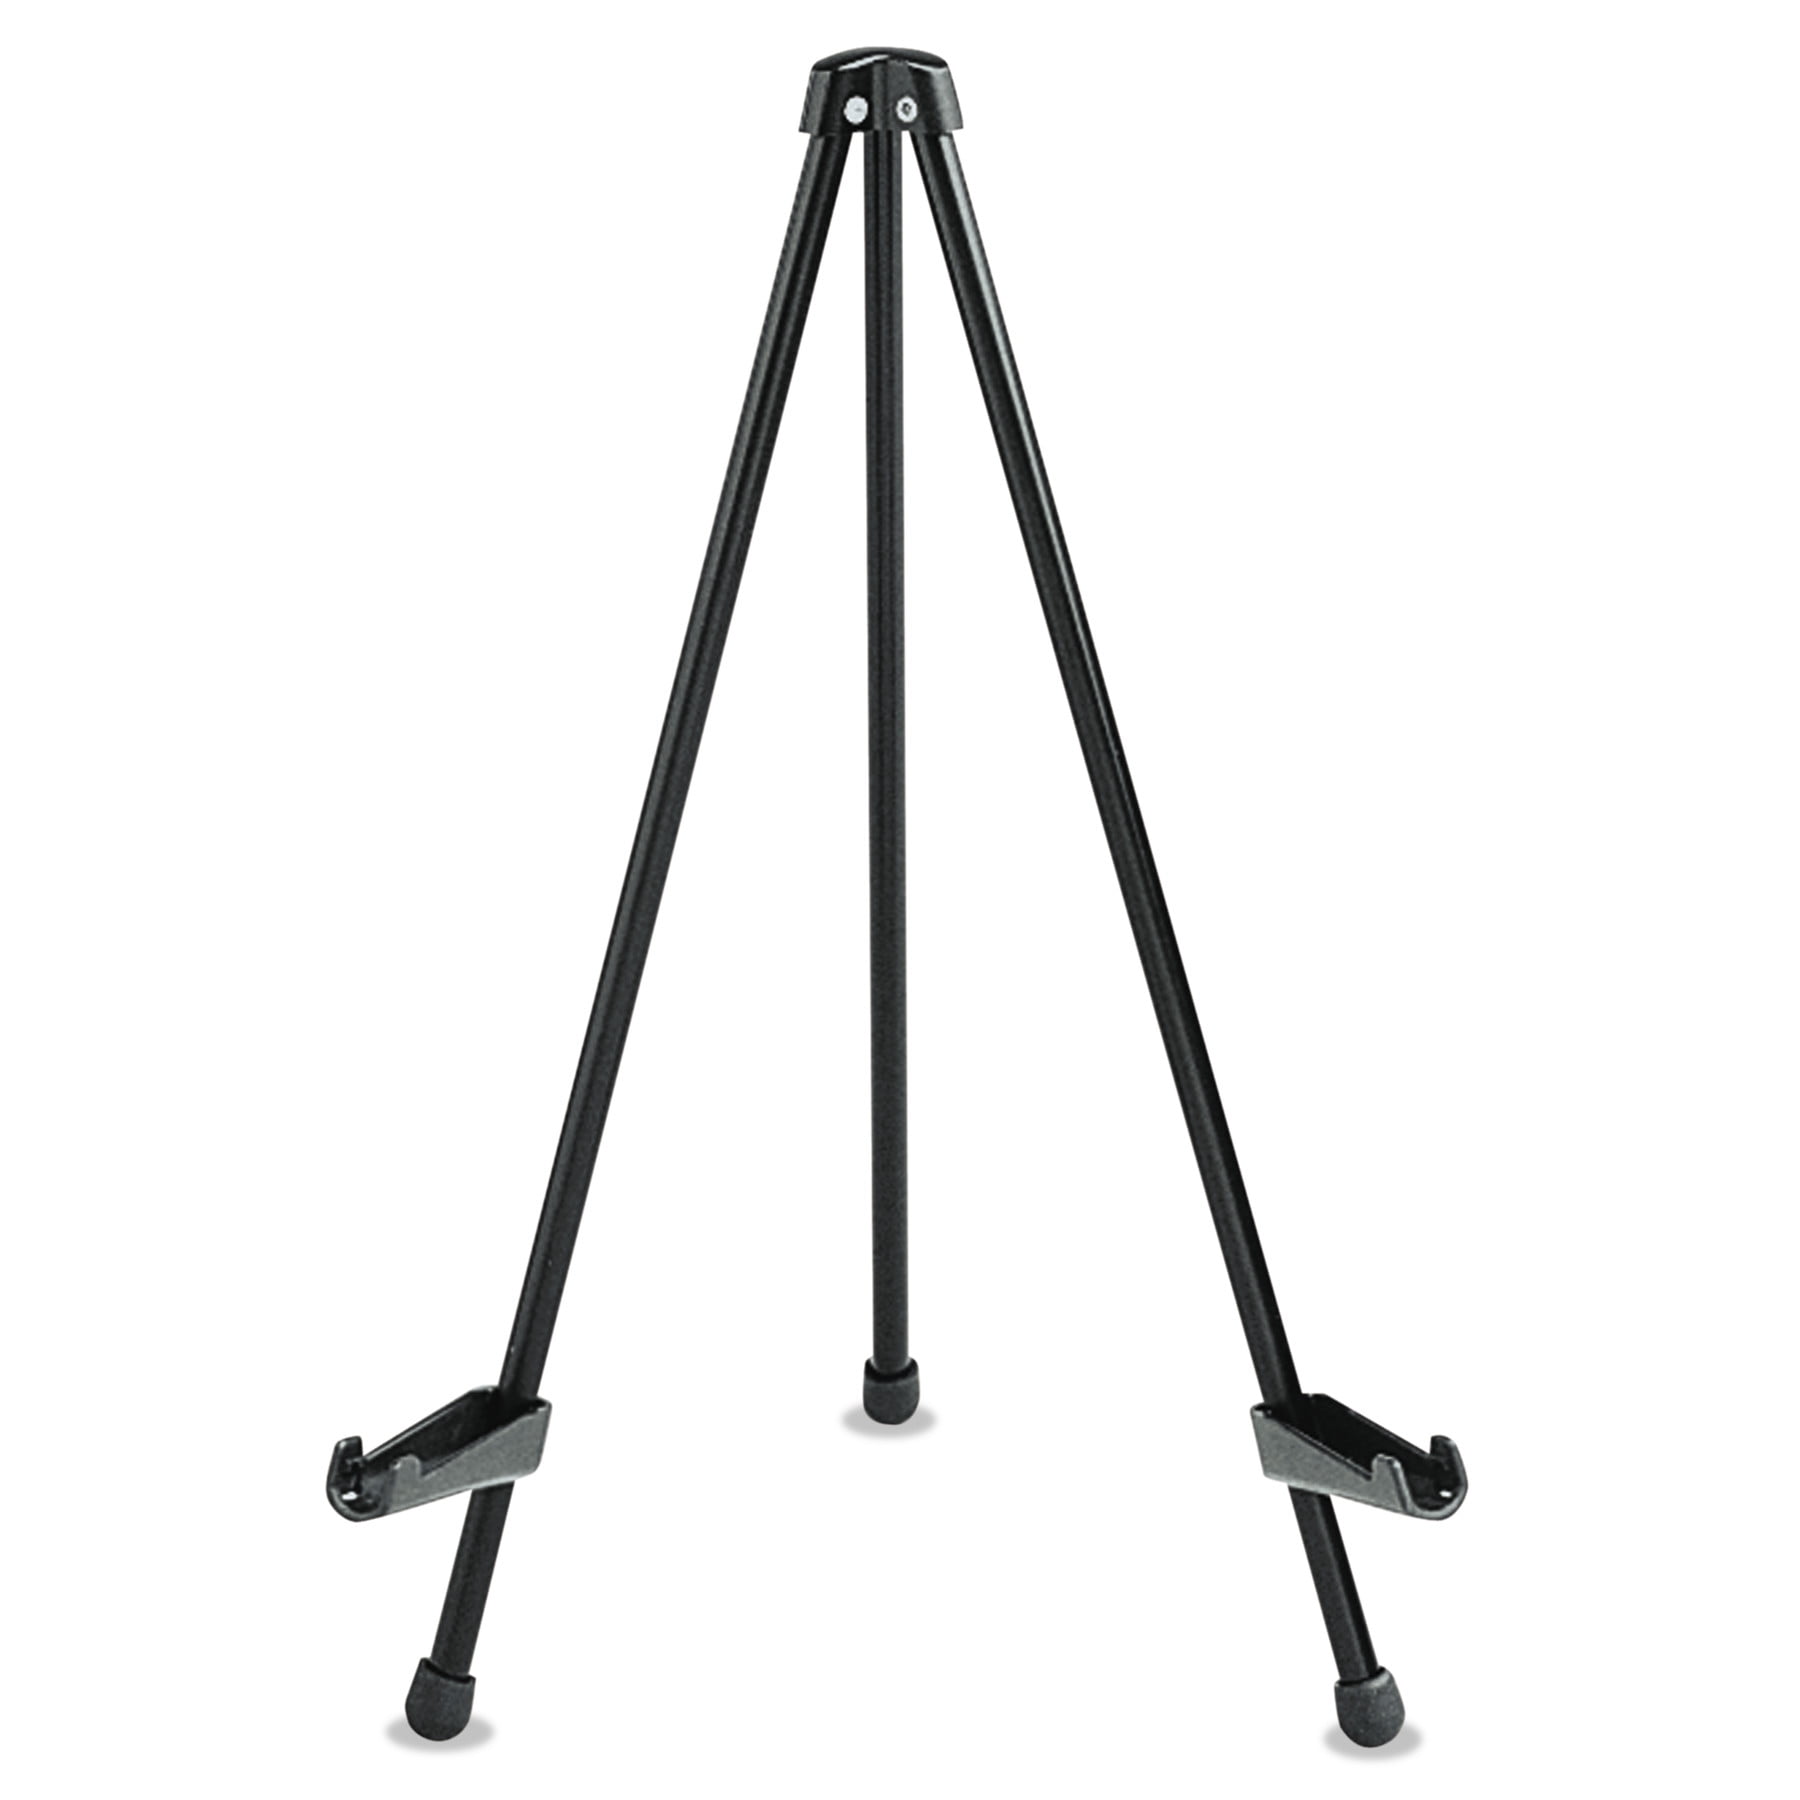 Quartet 27E Heavy-Duty Easel Black FREE 2DAY SHIPPING Holds Up To 10 lb